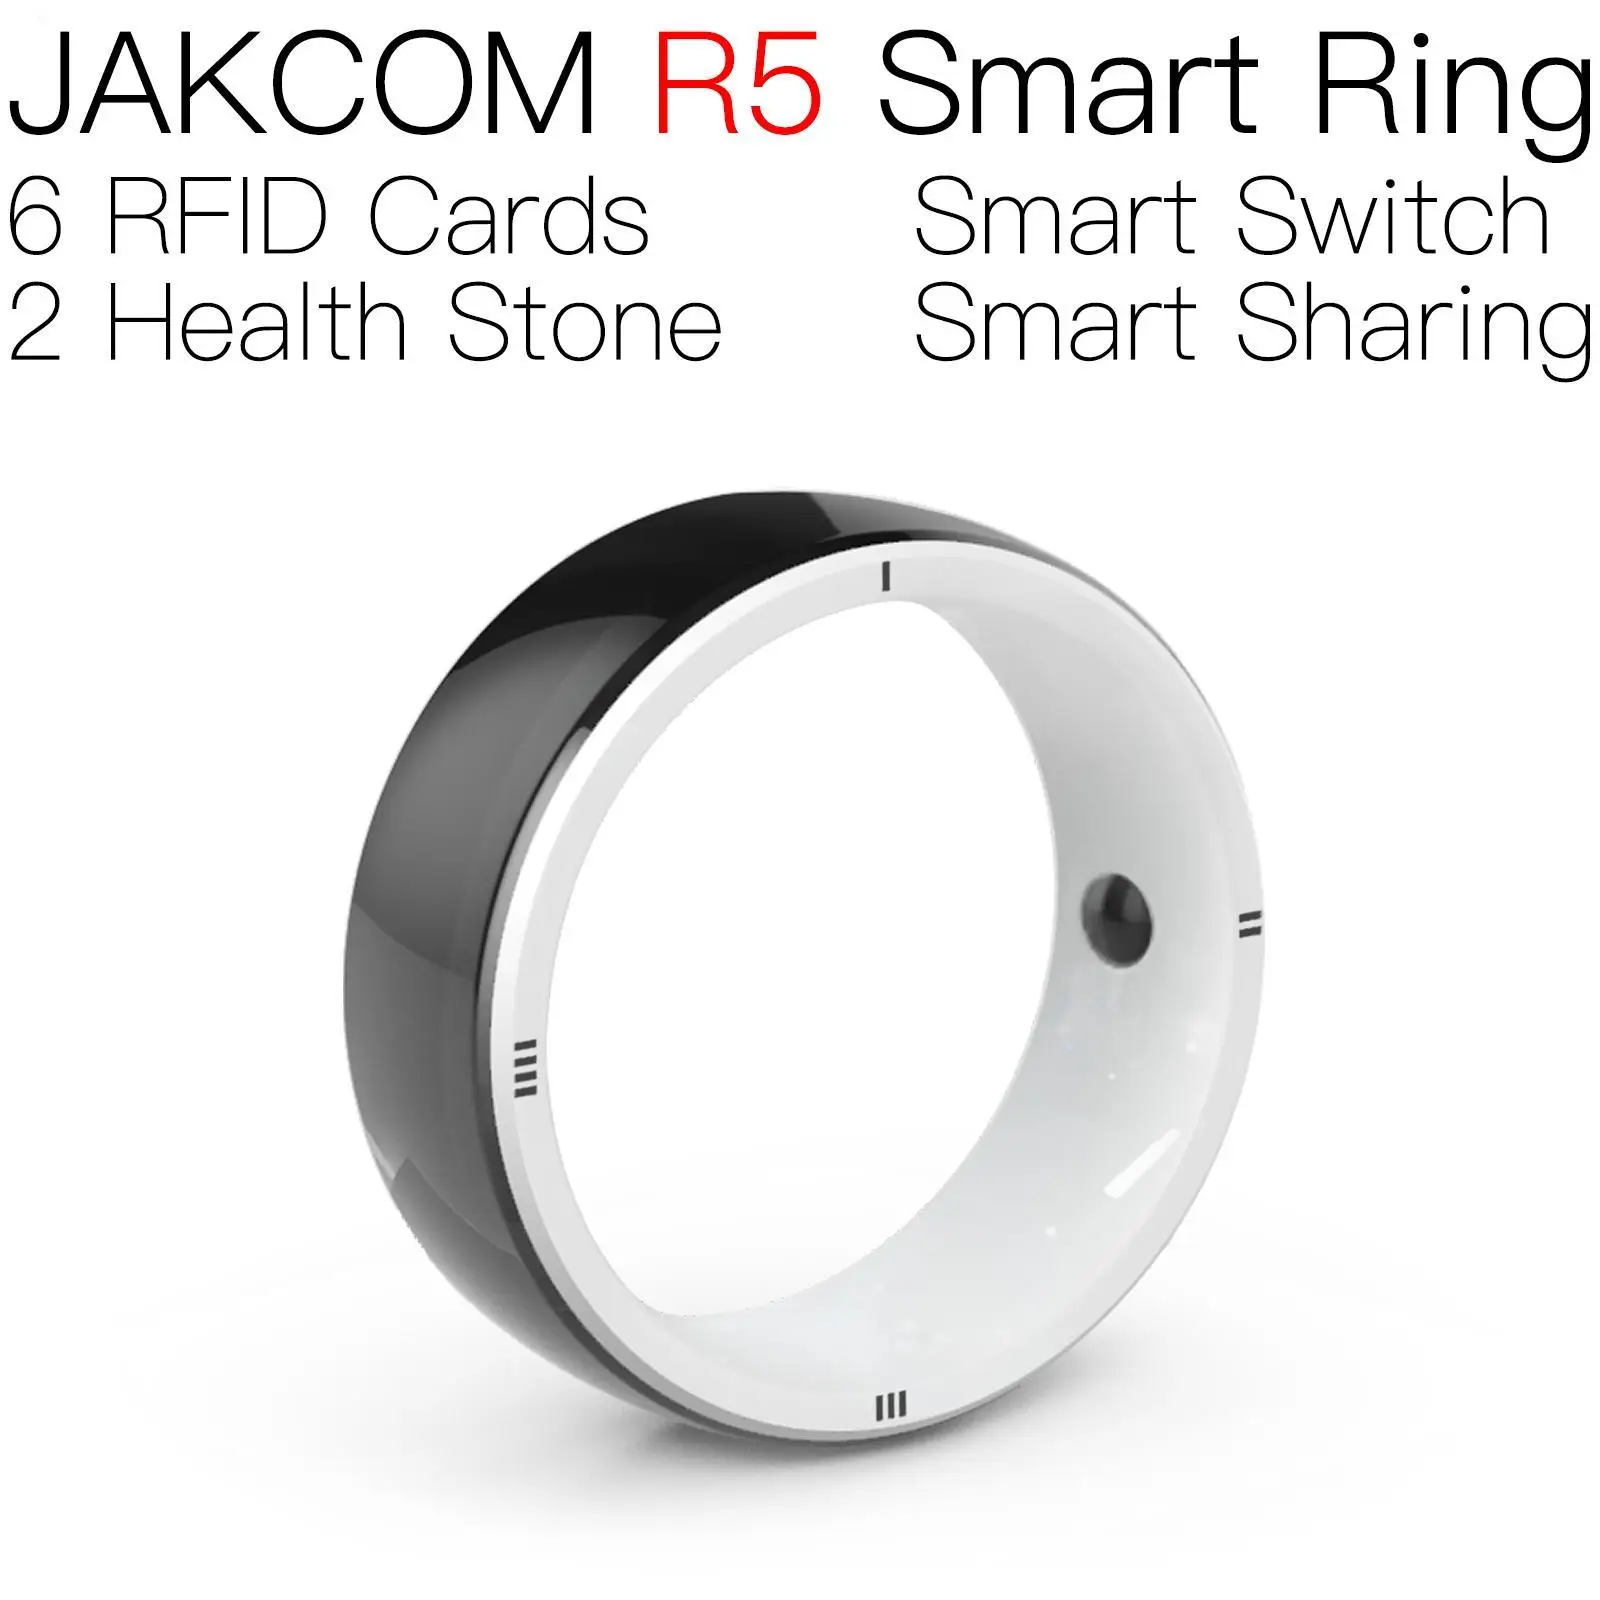 

JAKCOM R5 Smart Ring Newer than crossing card new horizon chip to track pet programmable nfc rfid reader s50 ntag wet